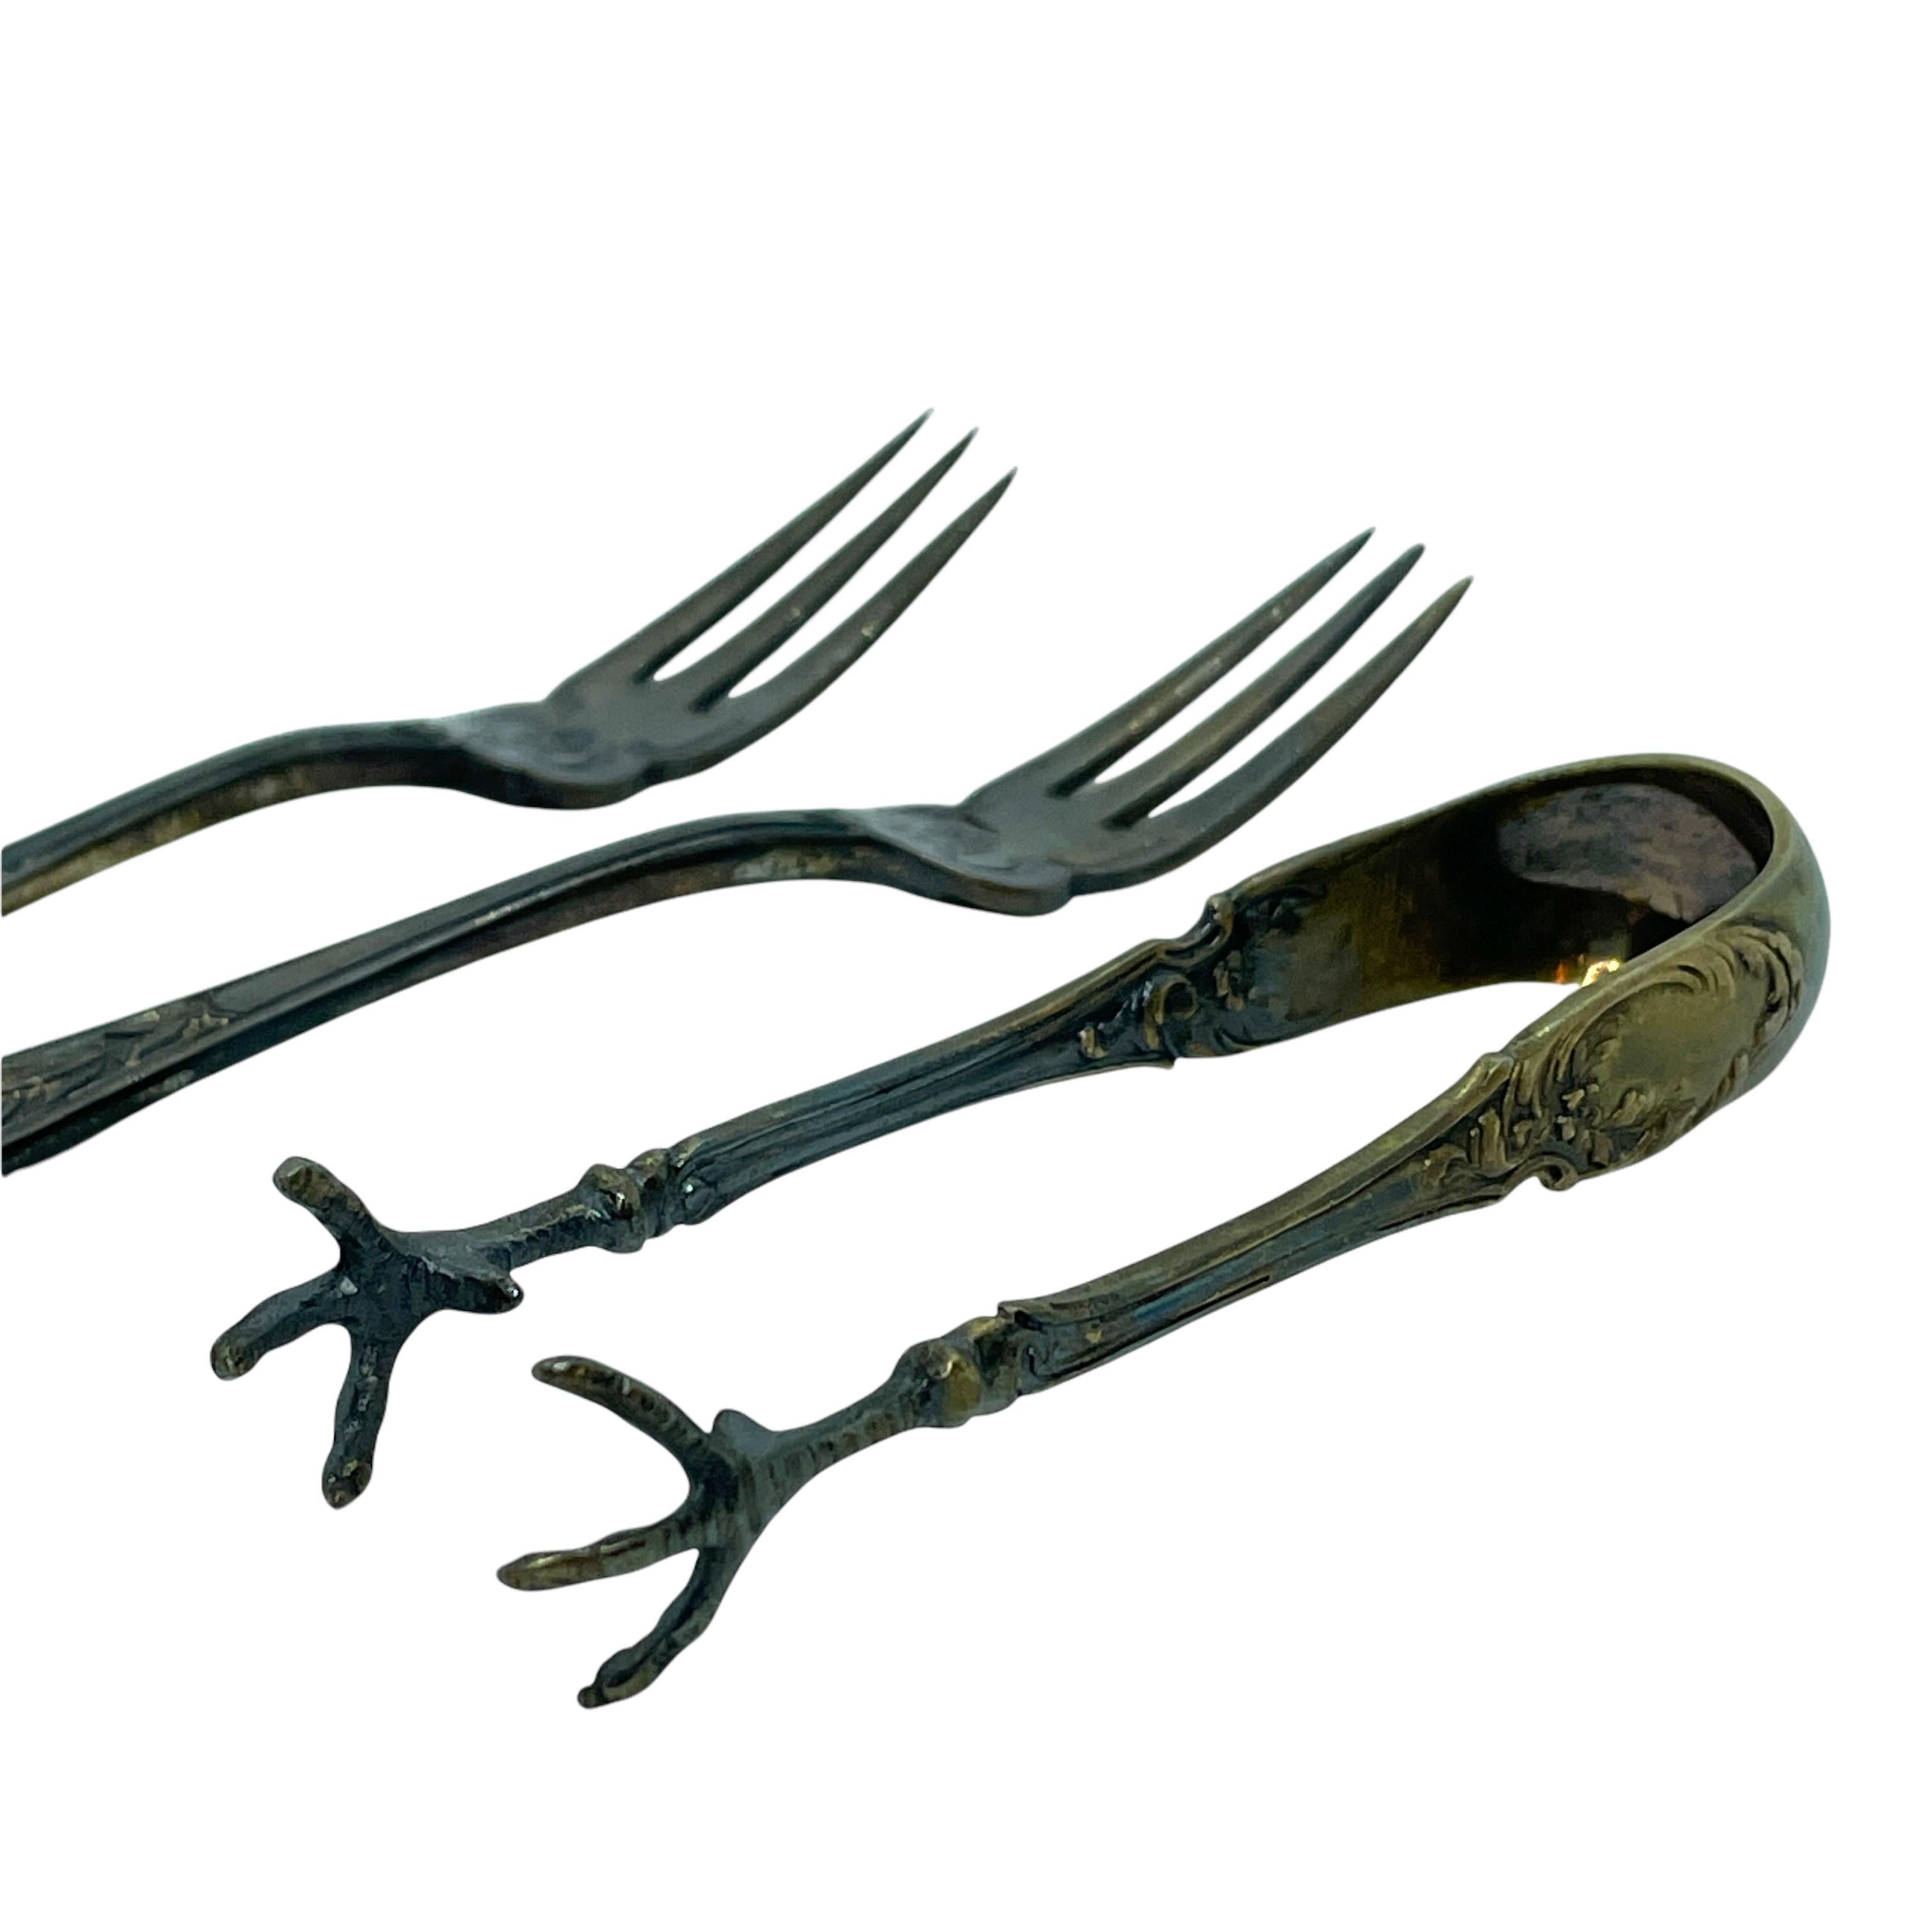 Art Nouveau Two Fruit Forks and Sugar Tongs in Case, Antique Germany, c. 1900 Silver 800 For Sale